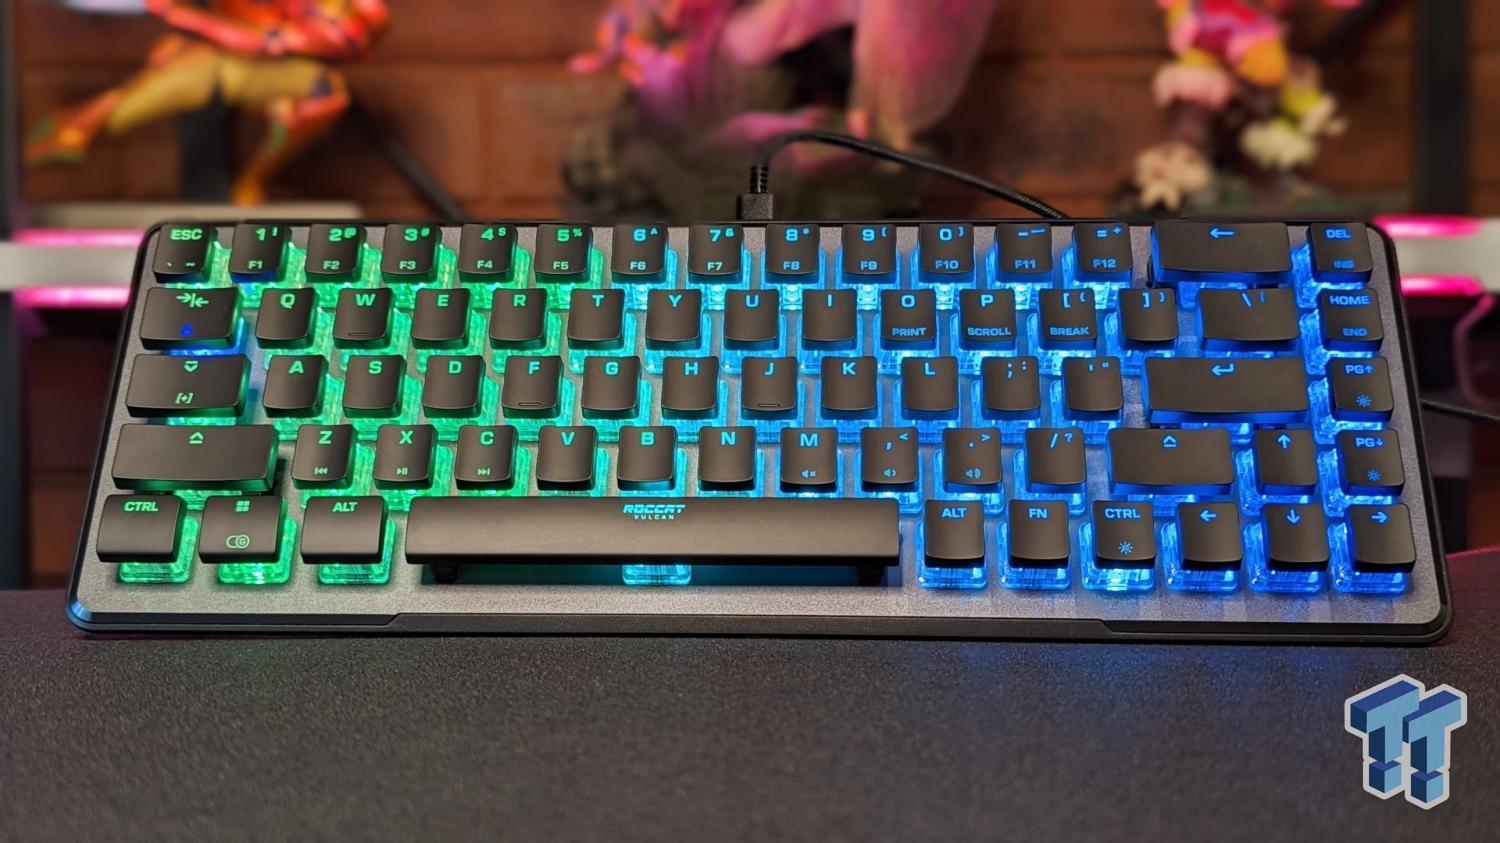 Roccat Vulcan II Mini mechanical keyboard review: Is this too much RGB?